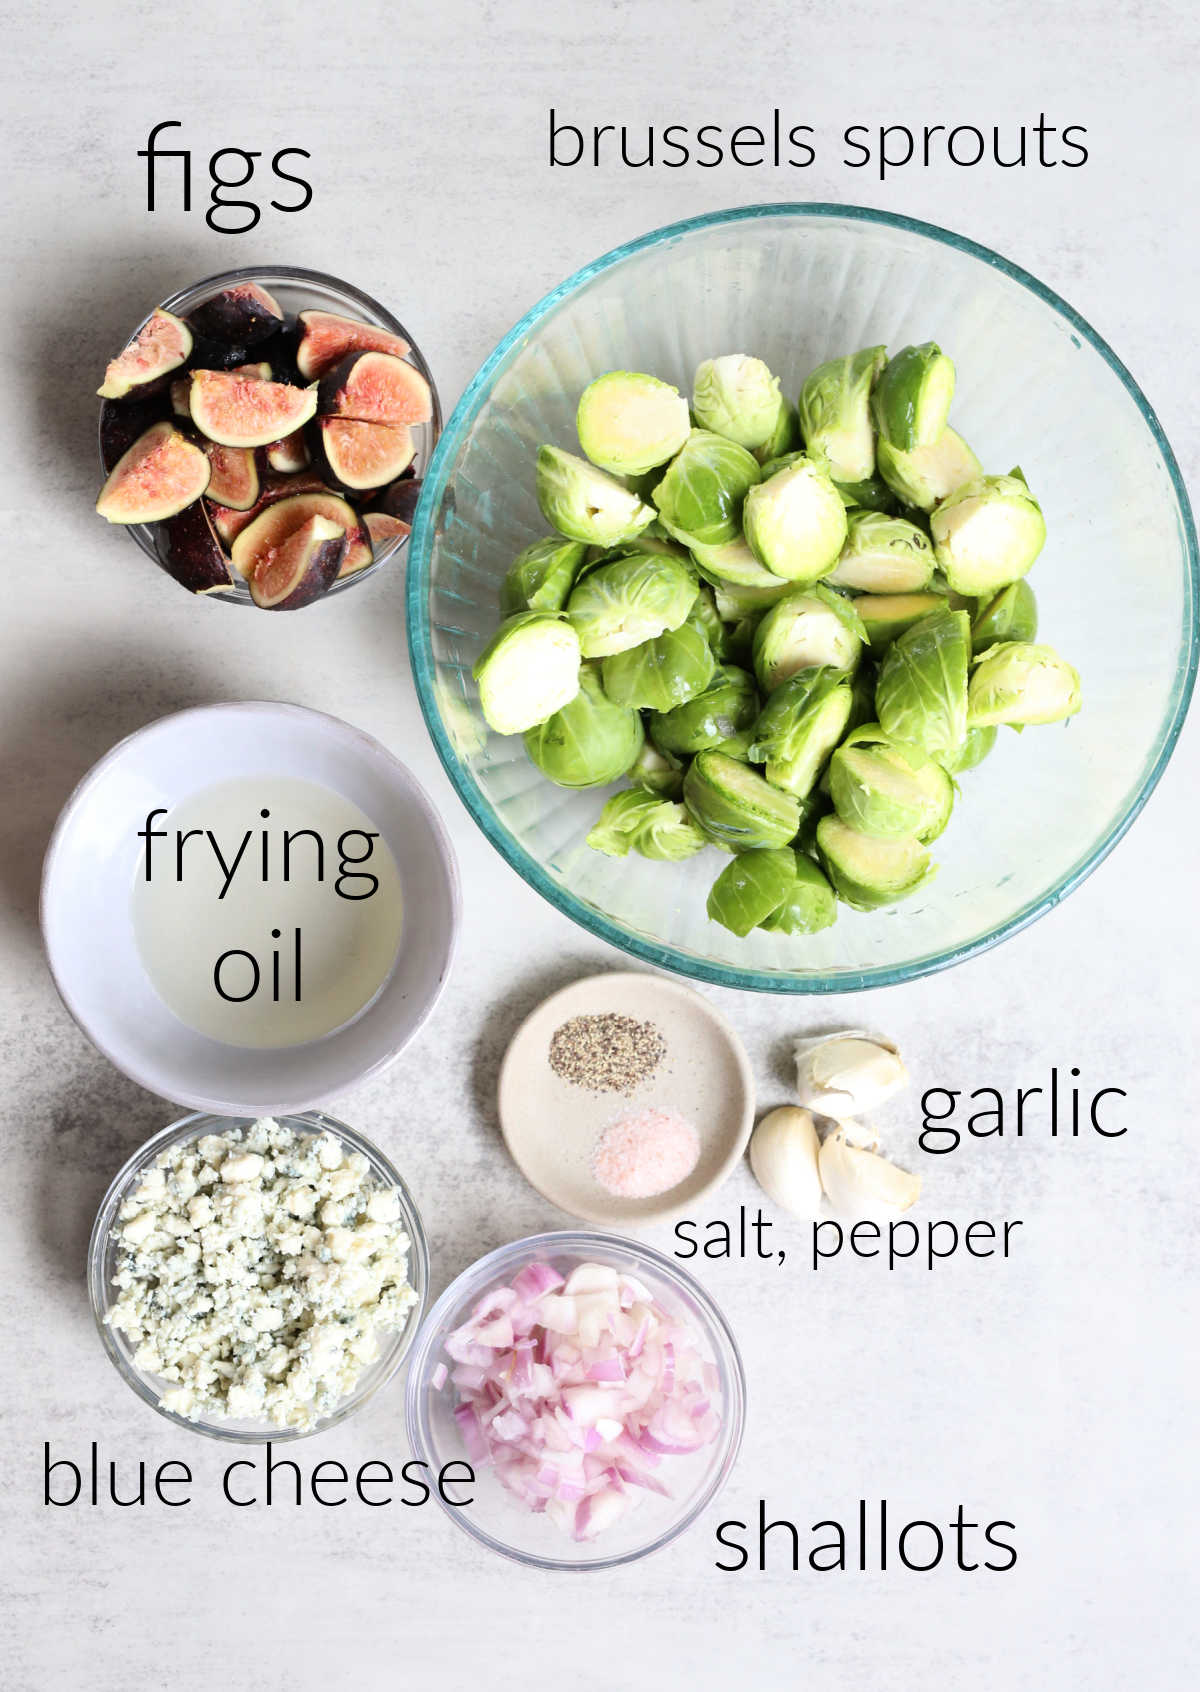 Ingredients for fried brussels sprouts.